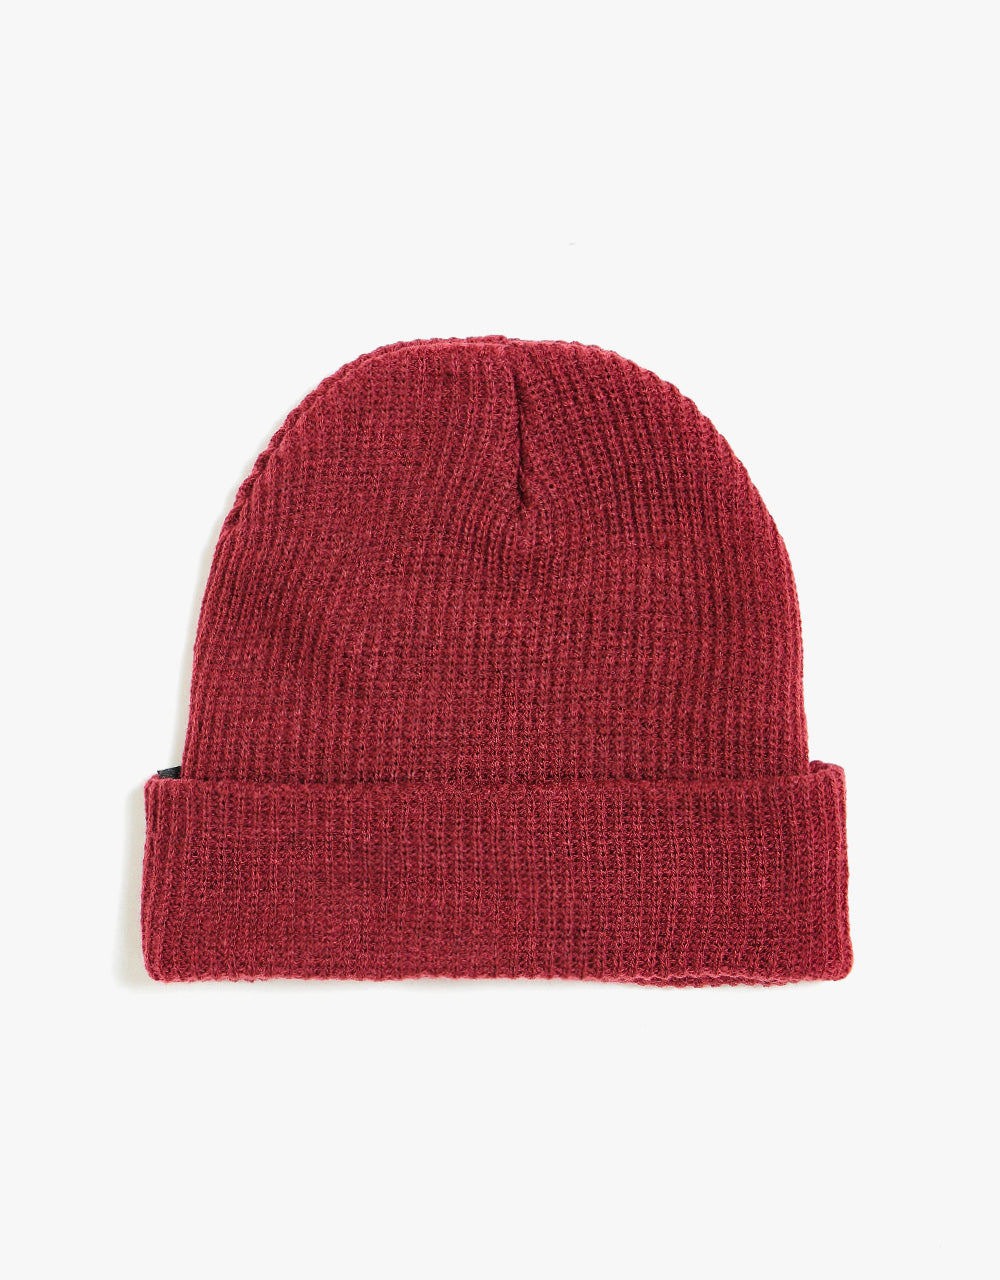 Route One Recycled Fisherman Beanie - Burgundy